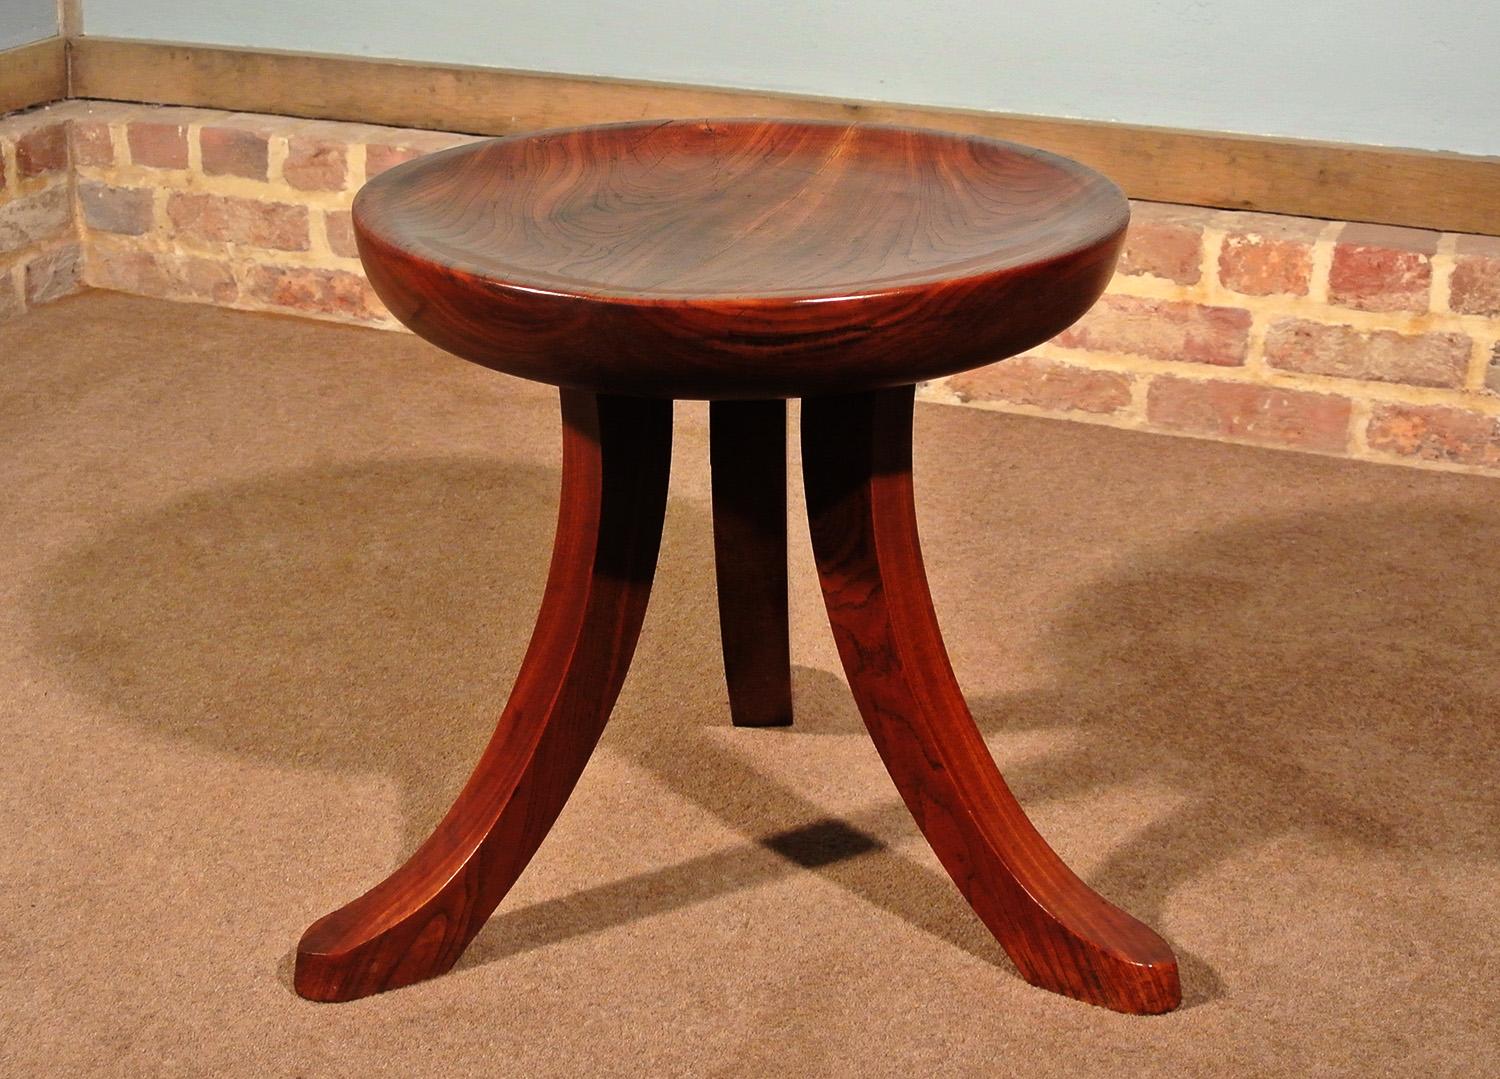 A very unusual Thebes style dished stool made from solid walnut and set on a curved tripod support.

Unmistakably Liberty but not stamped and not the usual Thebes design. 

Extremely heavy and with a fantastic color and figuring to the walnut